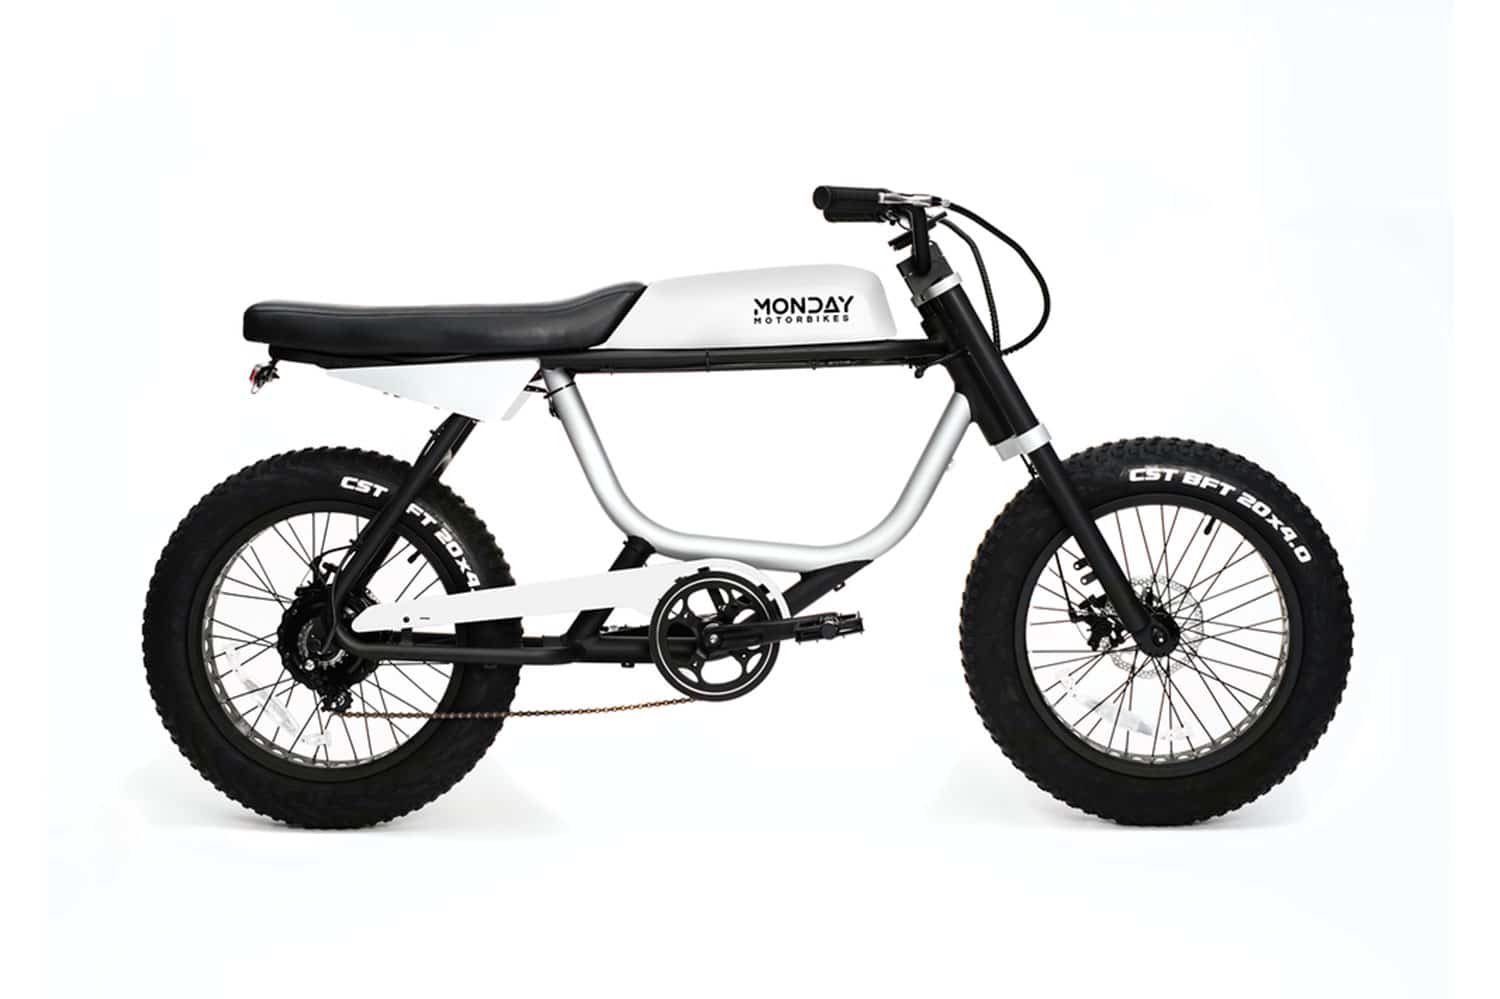 Monday Motorbikes unveils Anza, a lowest-priced e-moped.